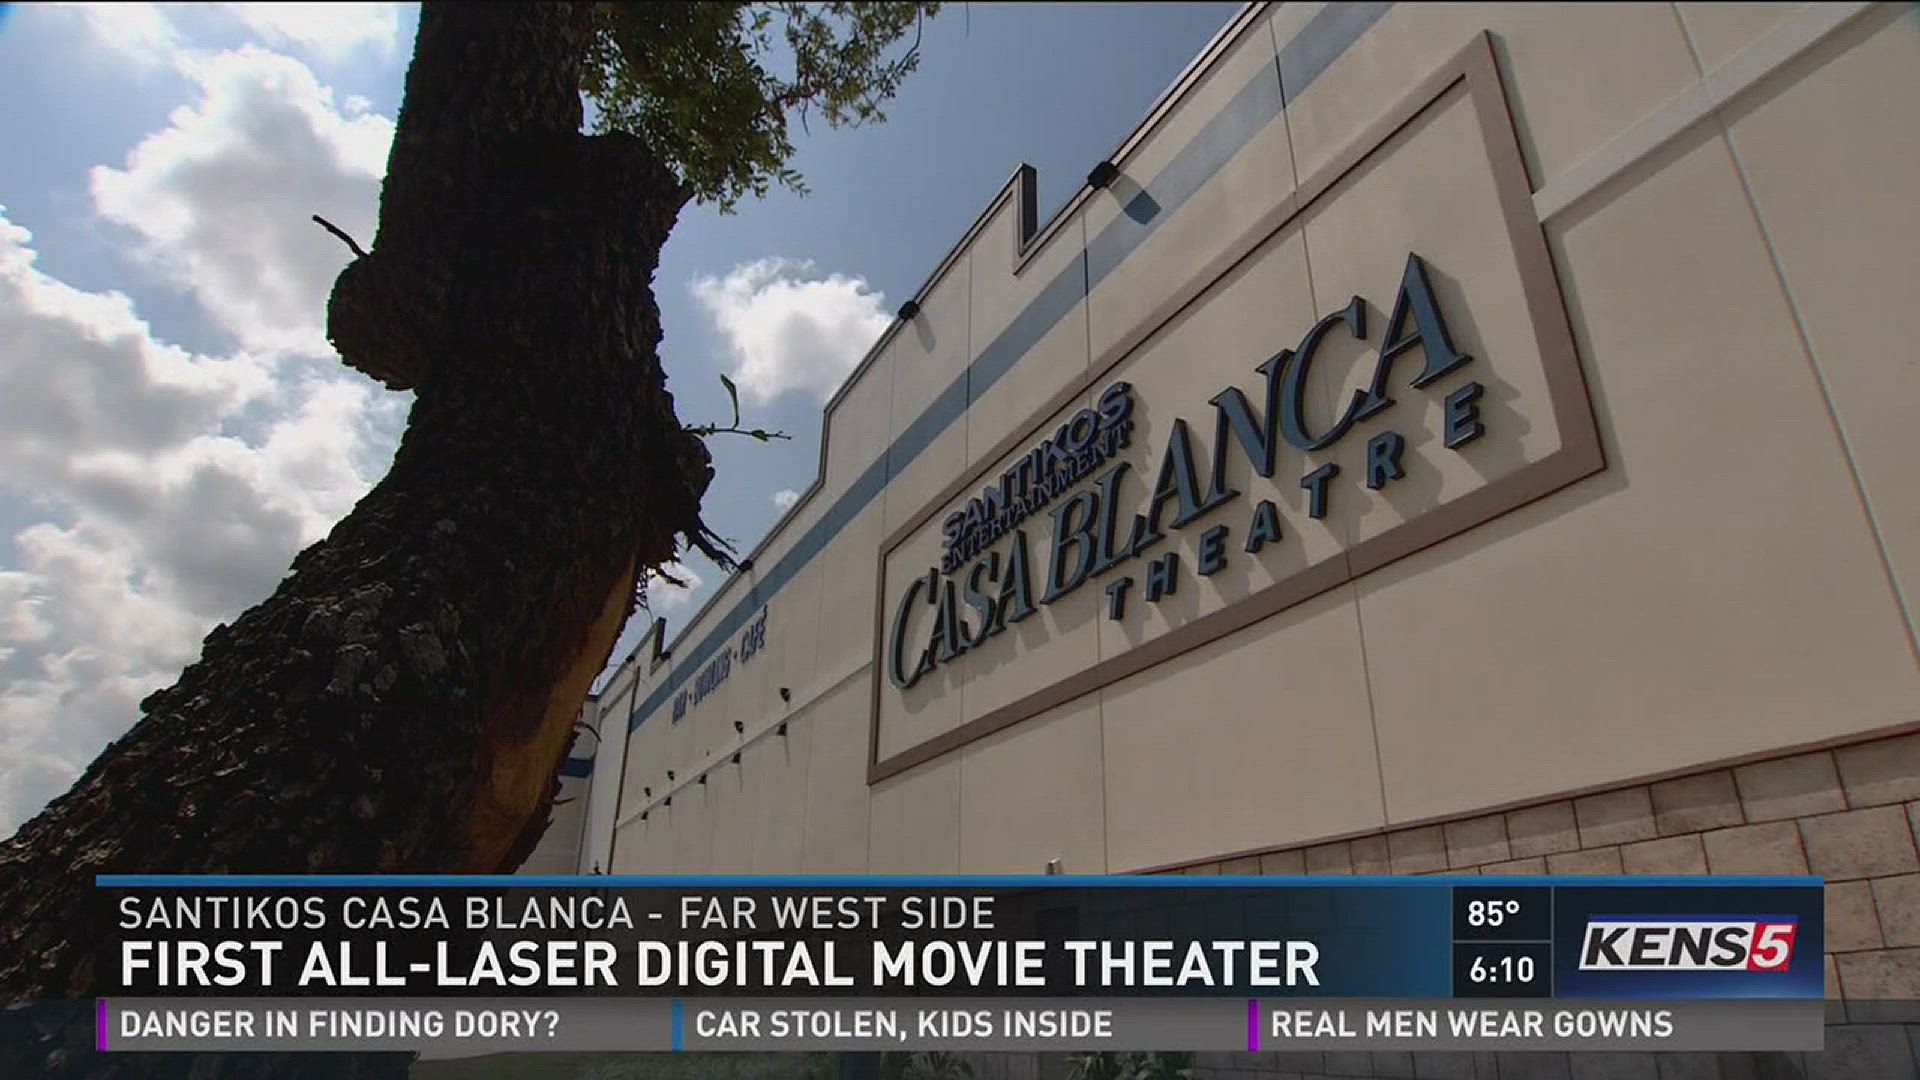 First all-laser digital movie theater